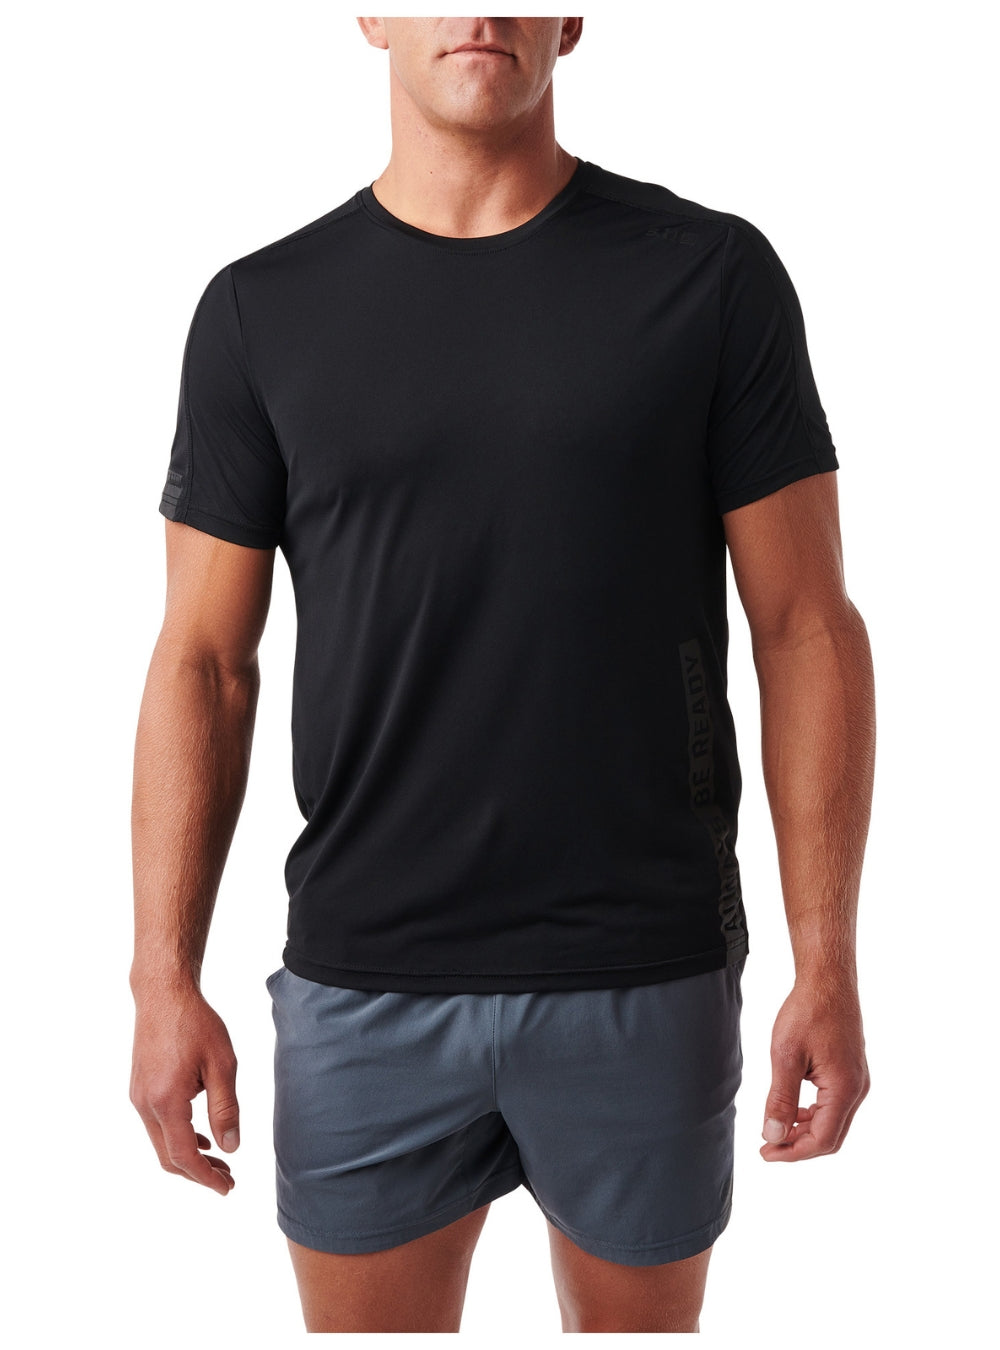 5.11 Tactical No Mercy PT-R Short Sleeve Training Top